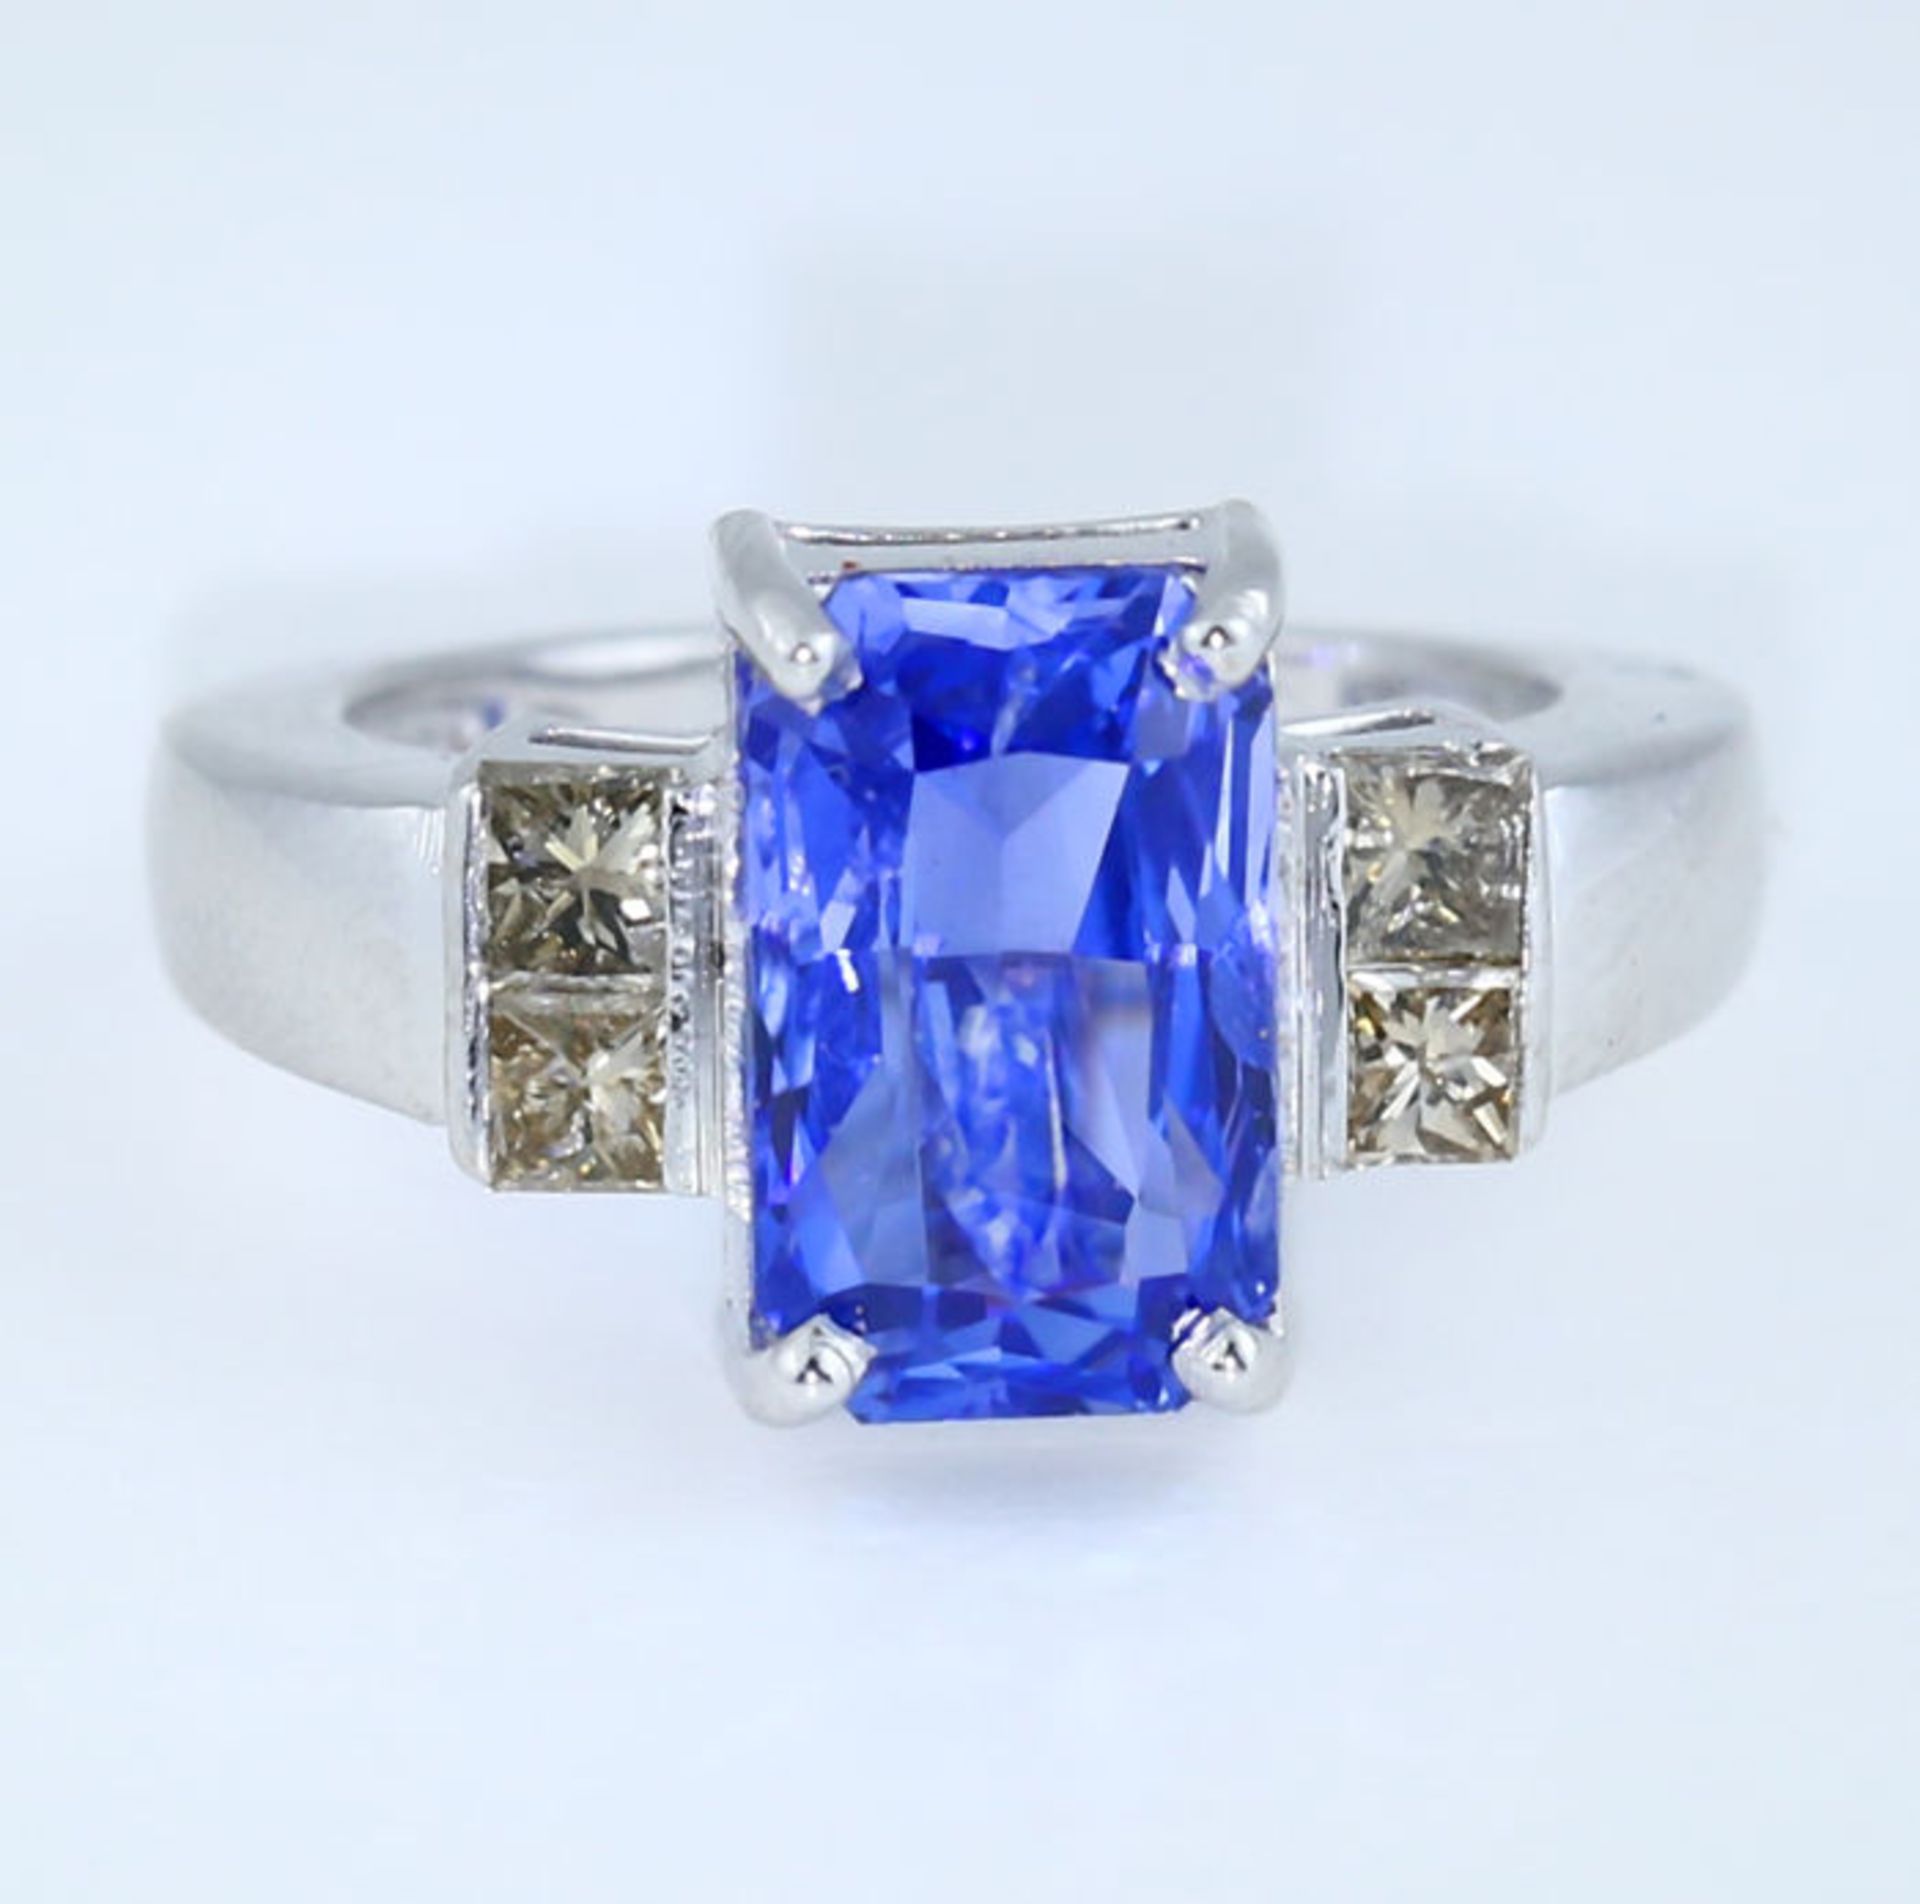 14 K Very Exclusive Designer White Gold Blue Sapphire (GIA Certified) and Diamond Ring - Image 4 of 10